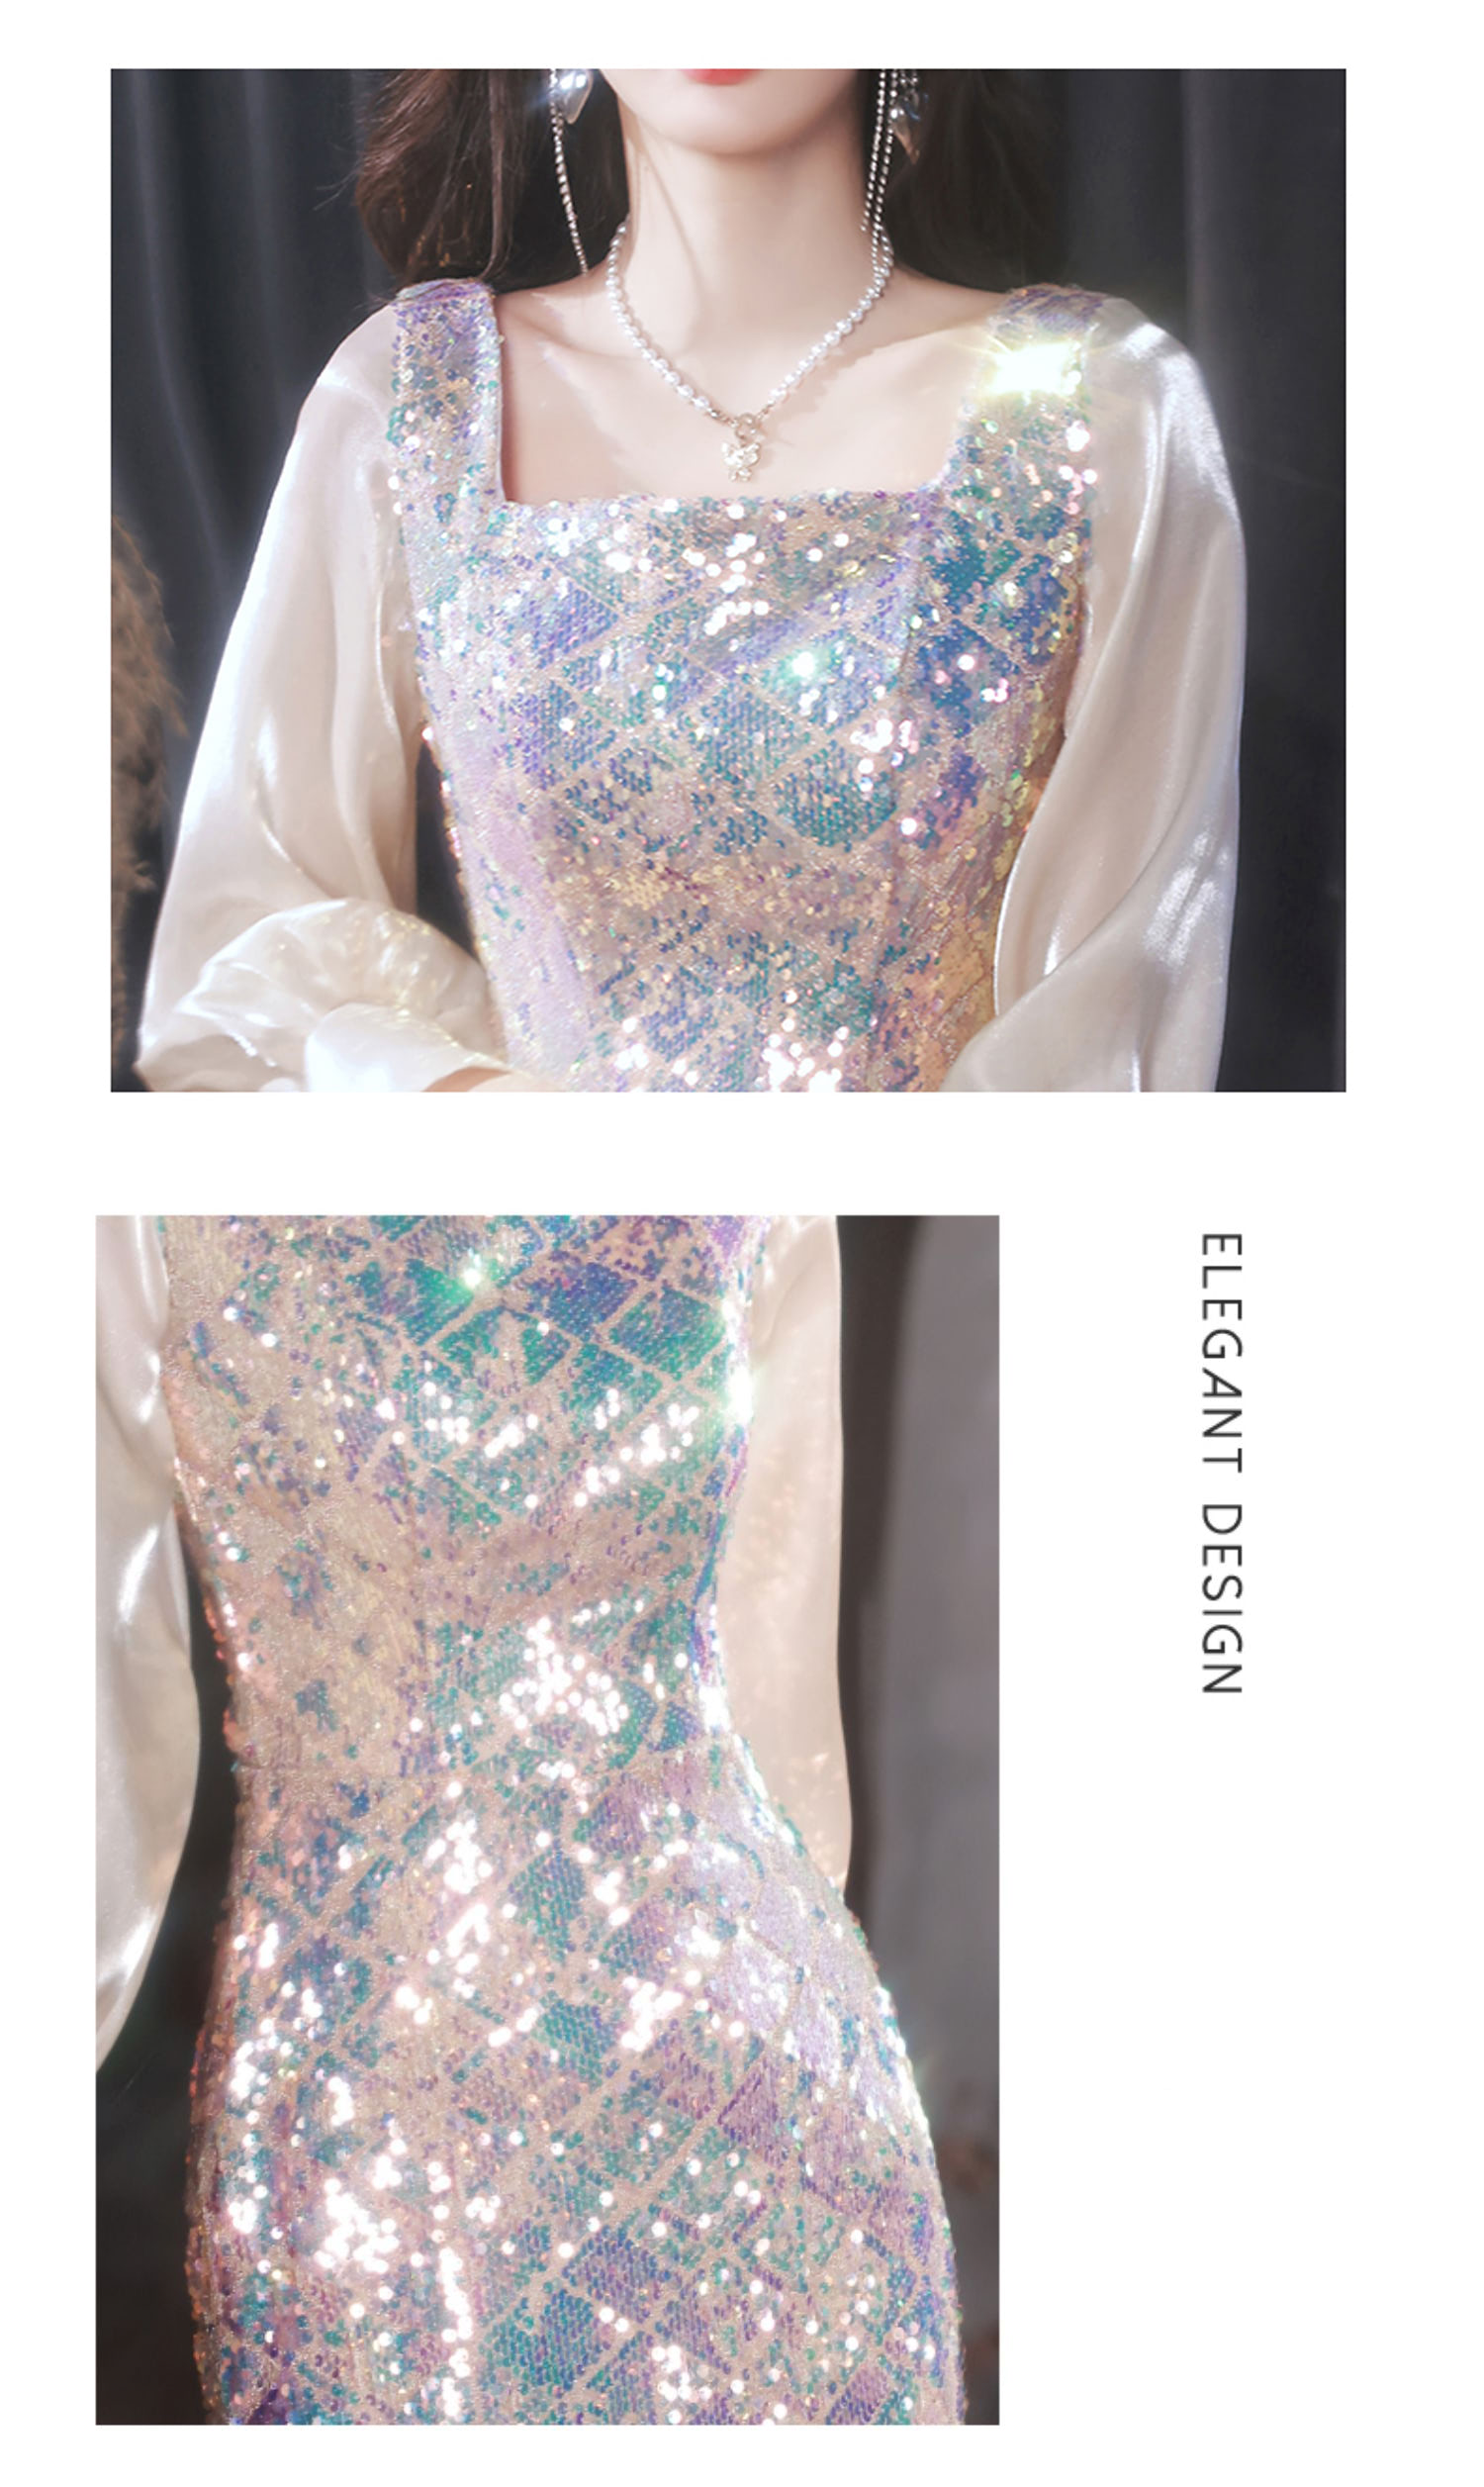 Luxury-Sparkly-Square-Neck-Long-Sleeve-Banquet-Party-Fishtail-Dress09